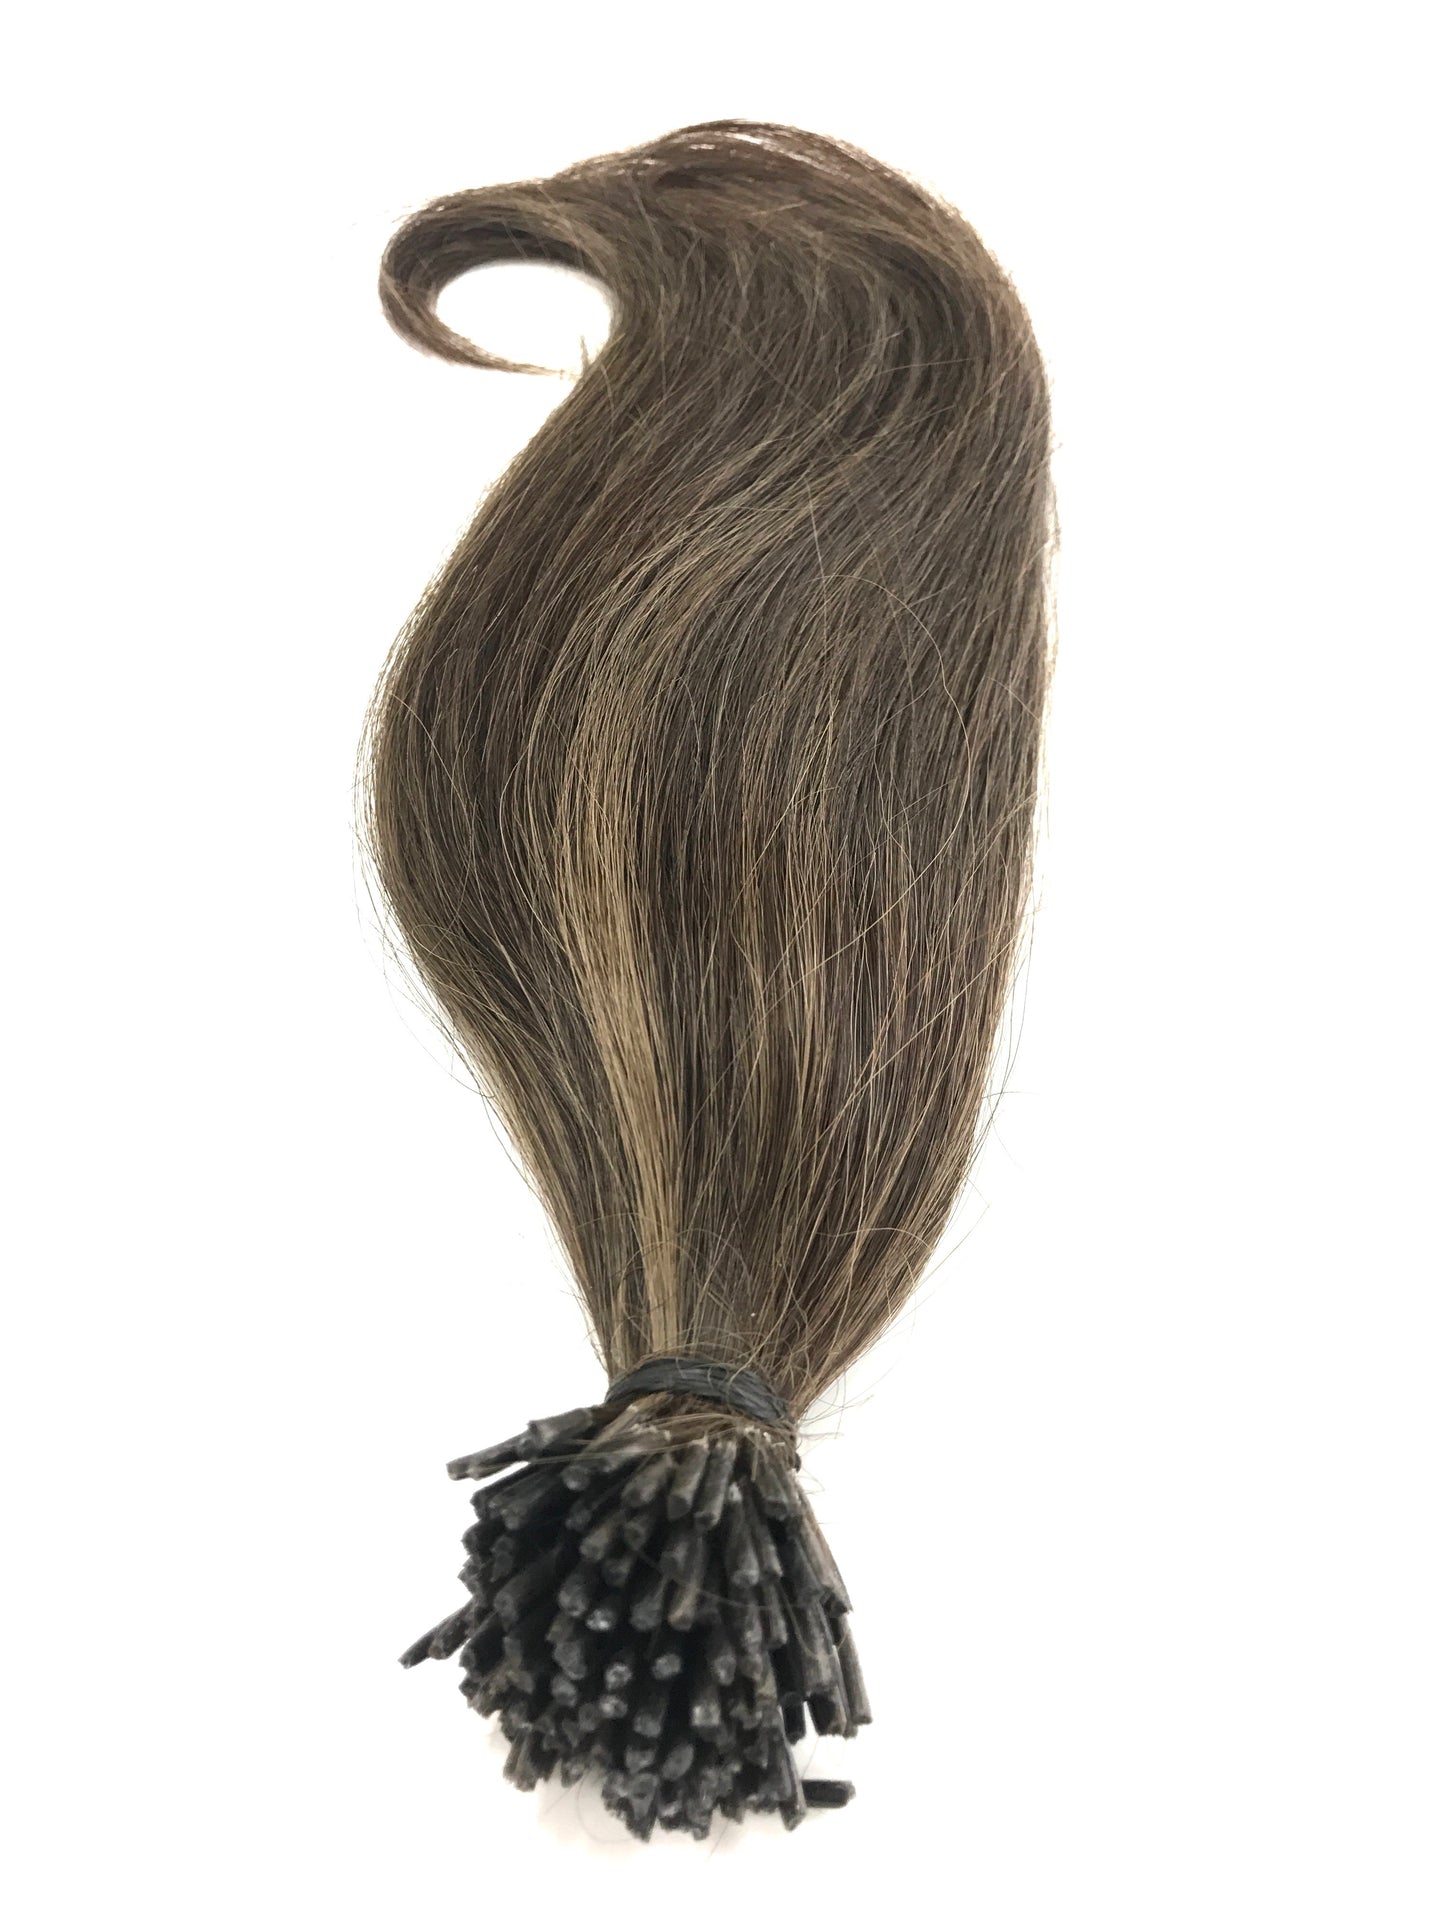 Russian Remy Human Hair, 0.7g i-Tips , Bodywave, 16'',100g, Quick Shipping!